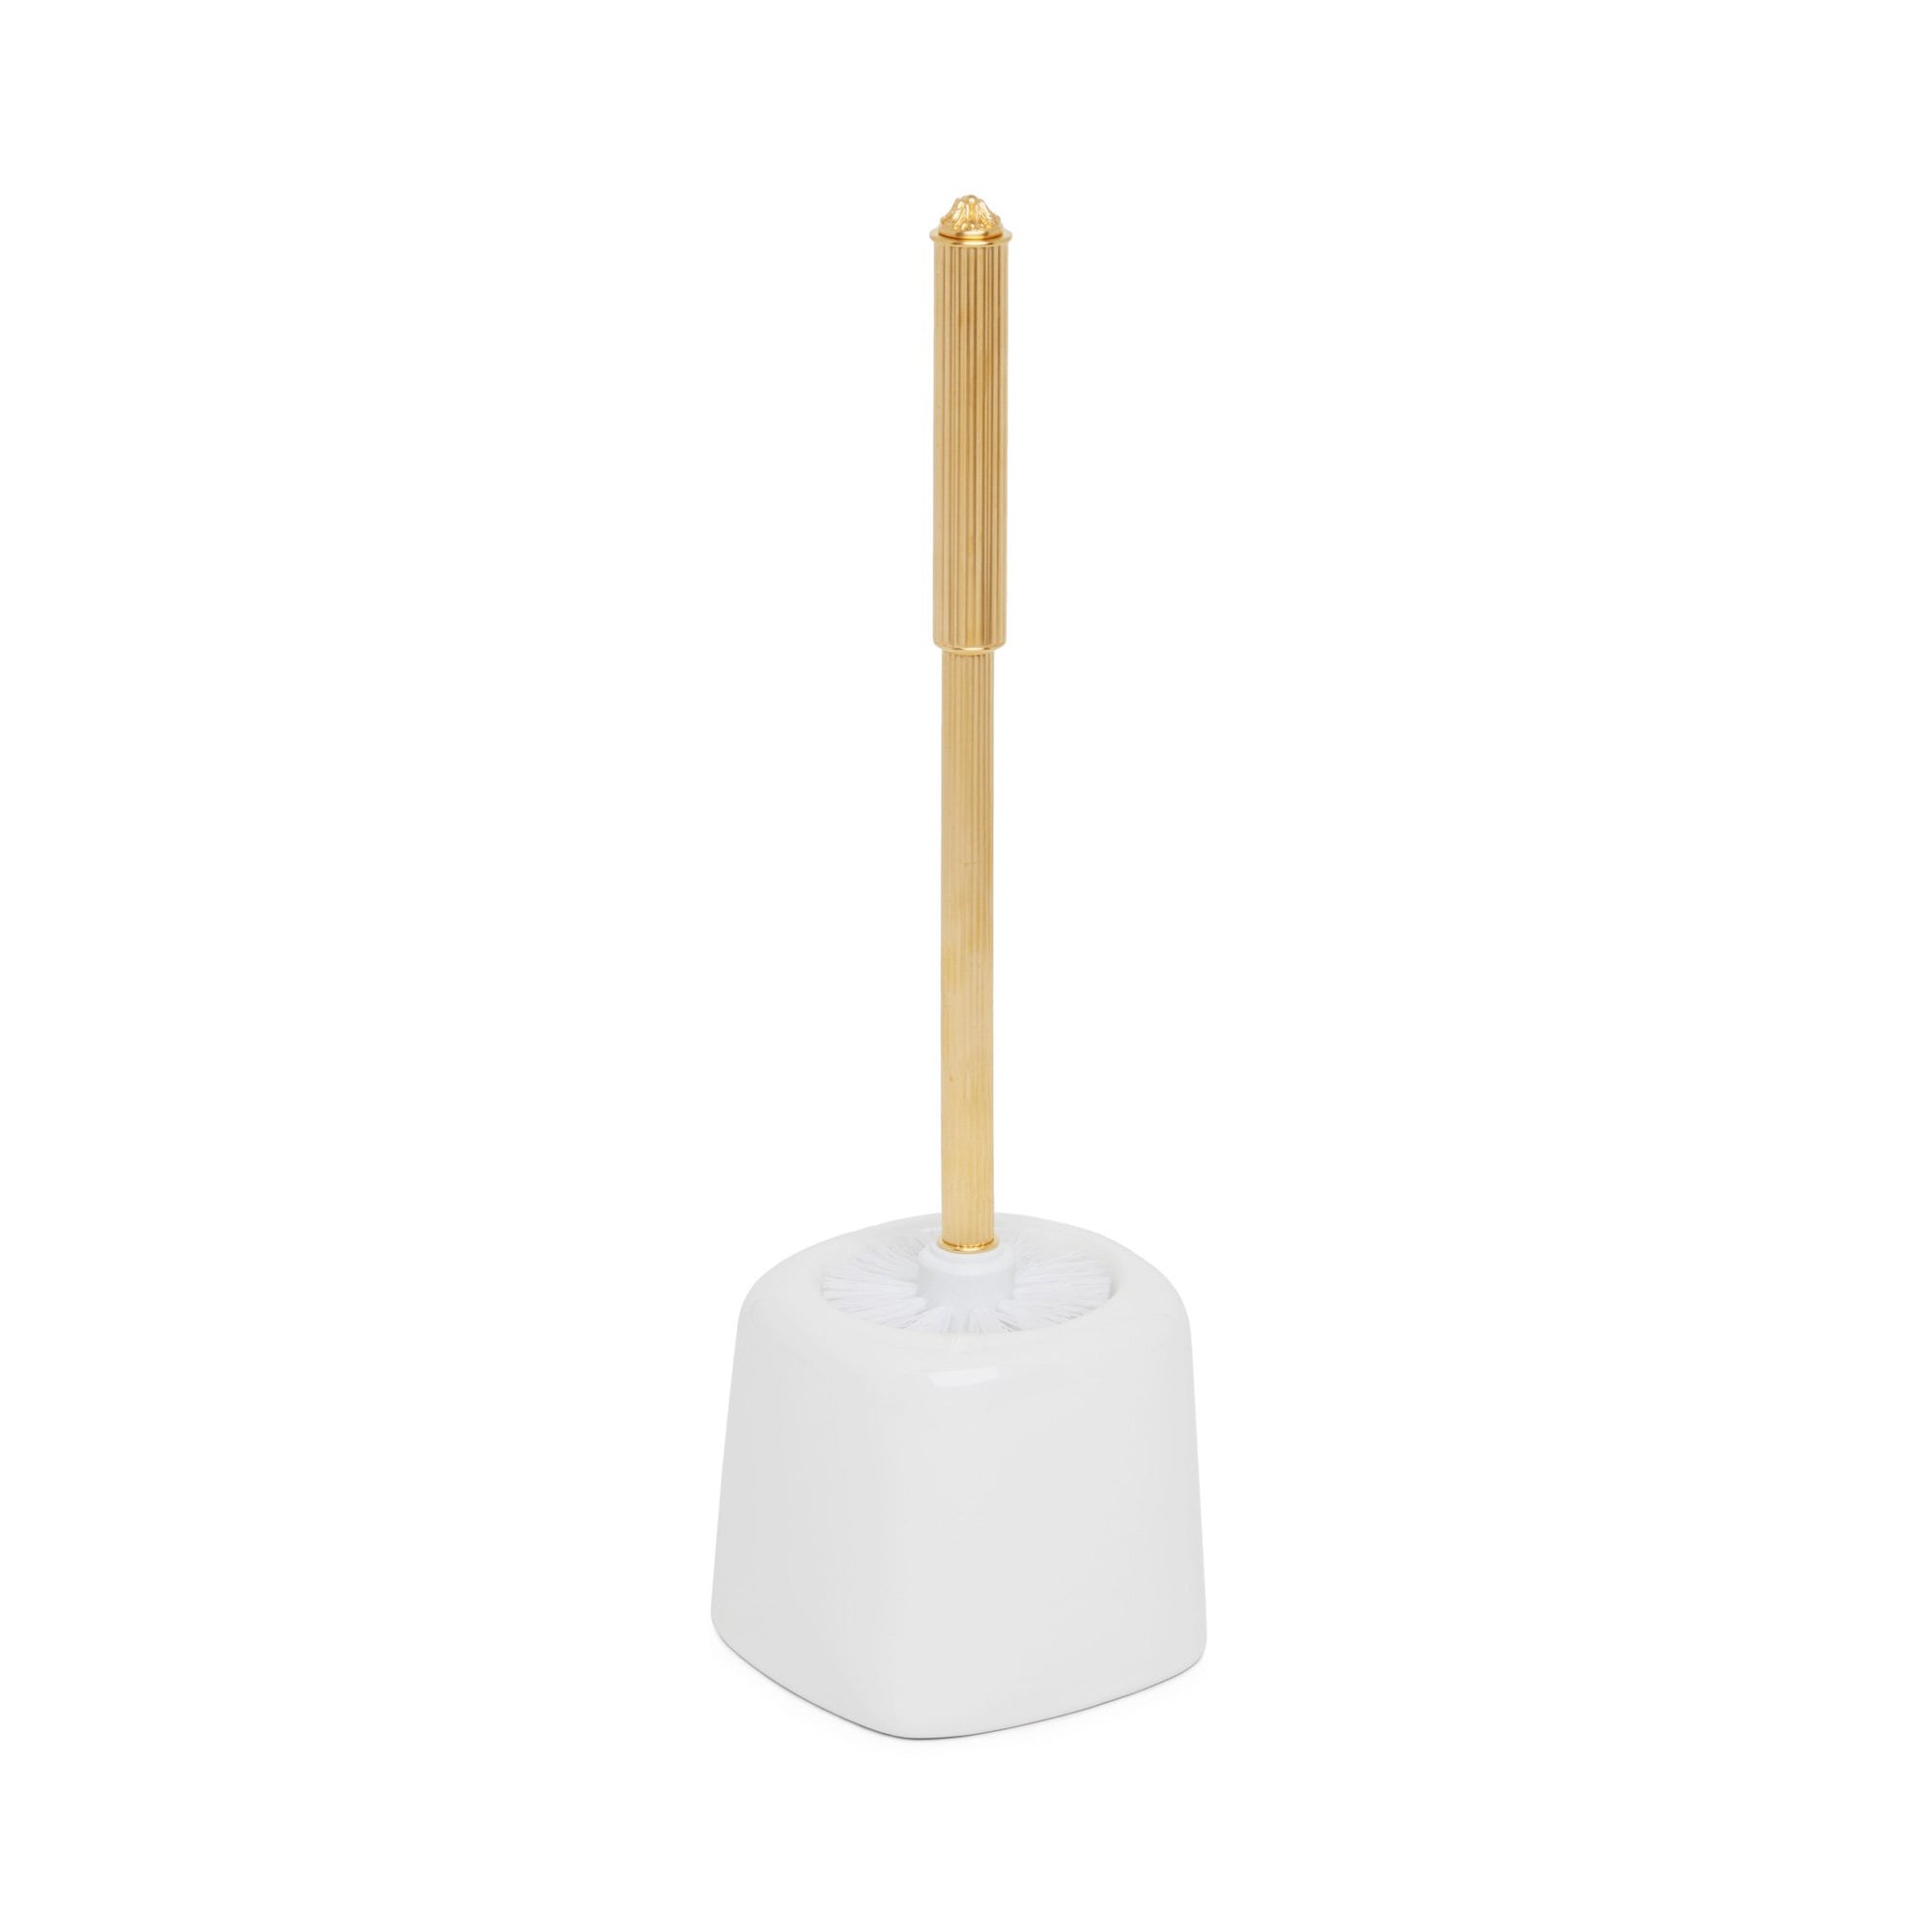 3396-GP Sherle Wagner International Toilet Brush with Metal Handle in Gold Plate metal finish